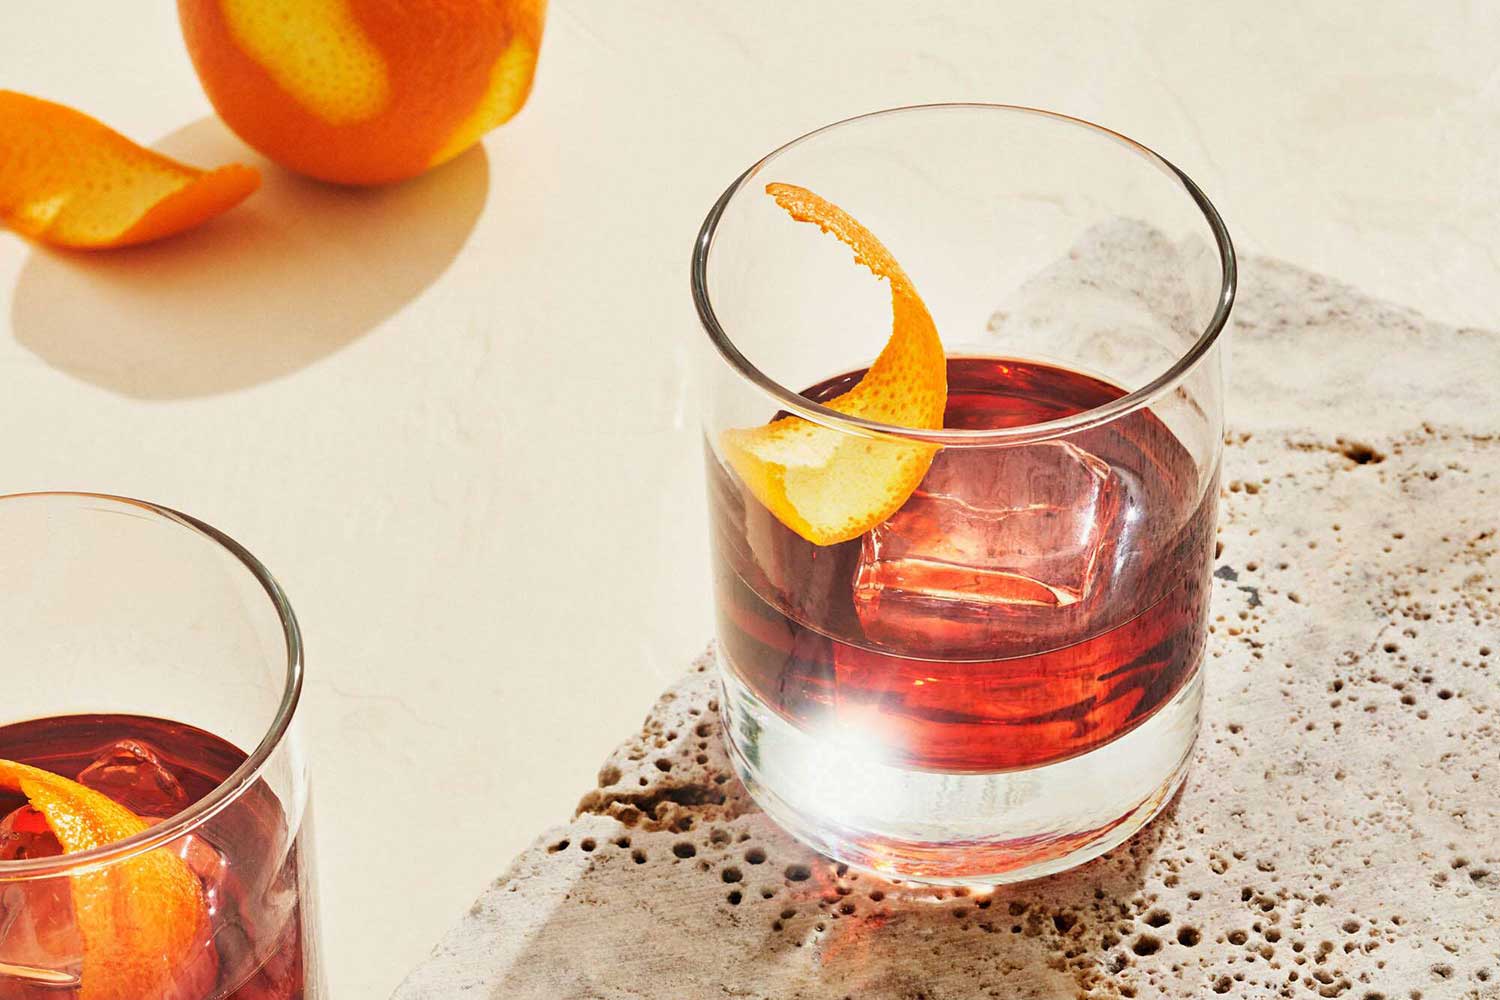 A Negroni garnished with an orange peel.